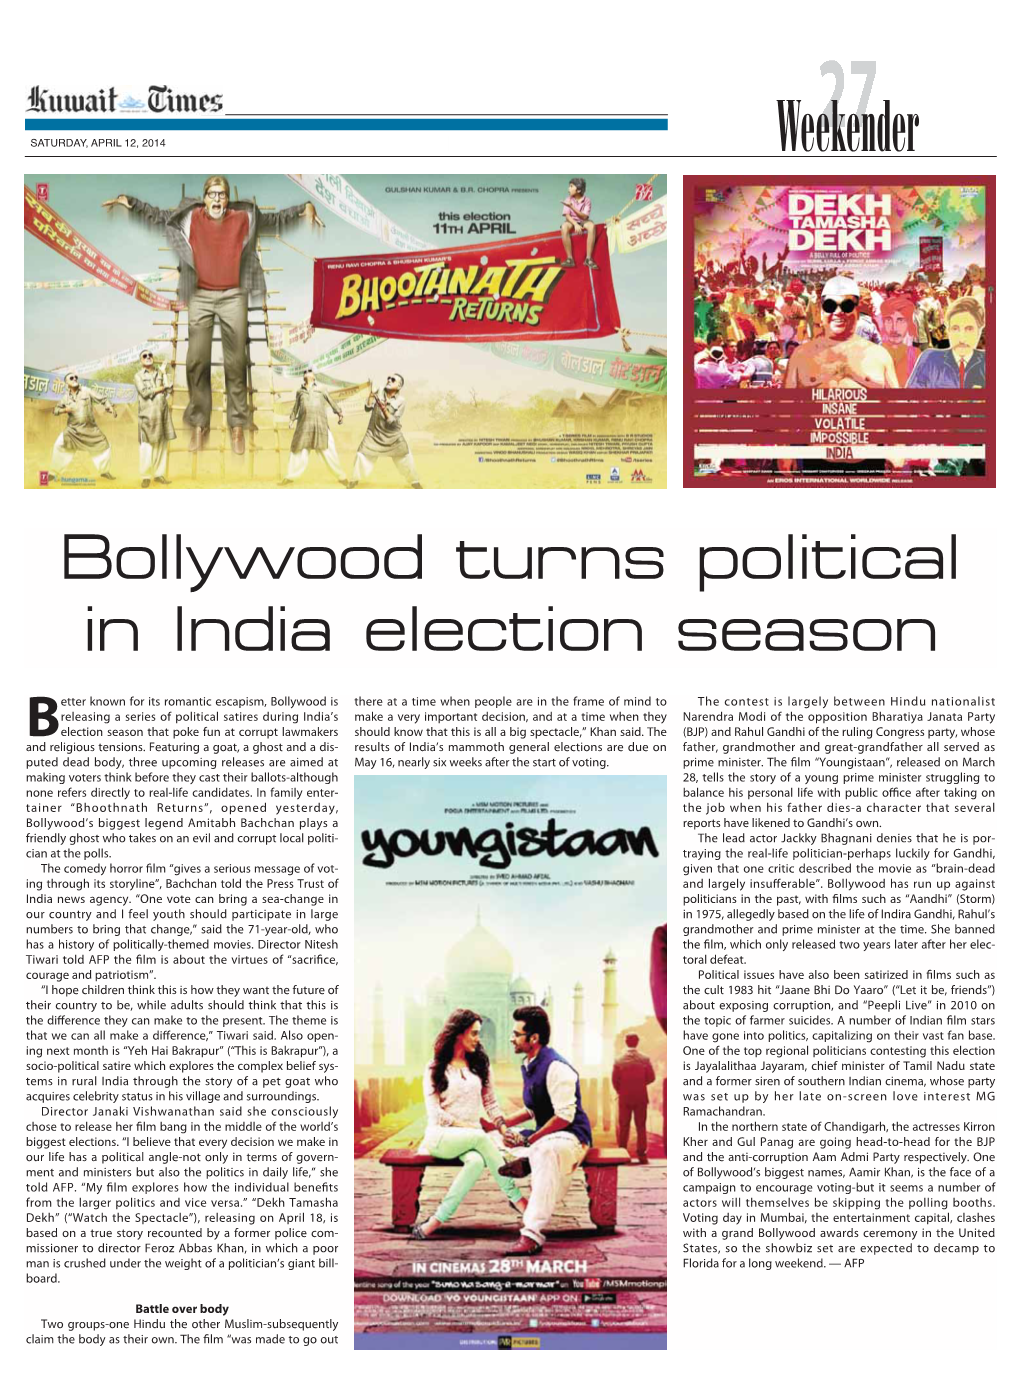 Bollywood Turns Political in India Election Season